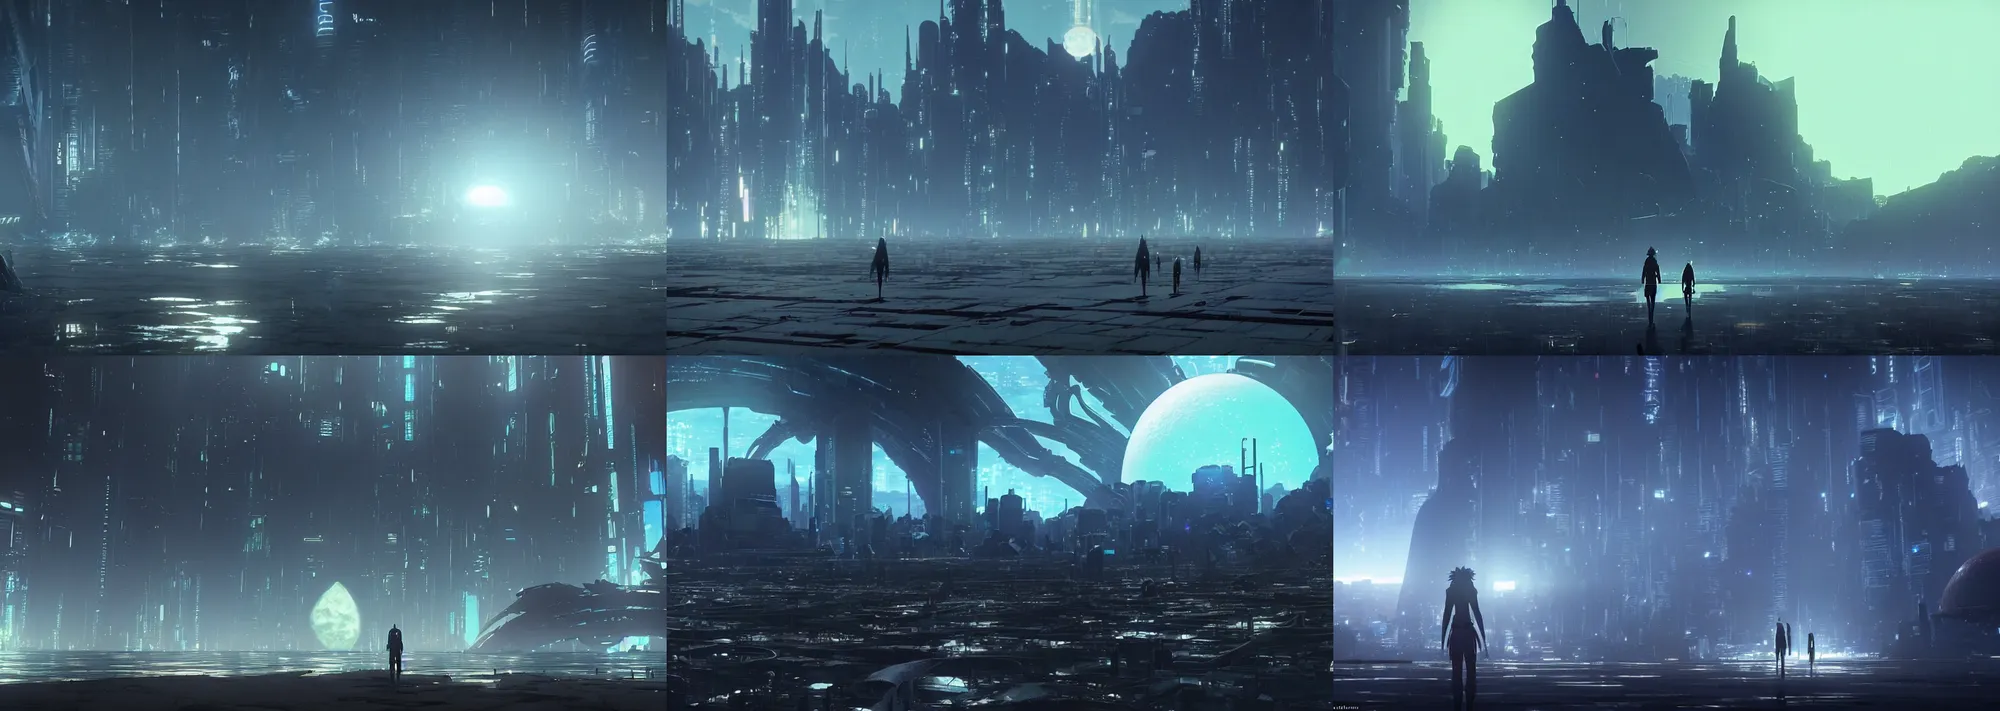 Prompt: a black desert on an ethereal alien world with ruins from the ghost in the shell anime film; an atmospheric image from the science fiction anime film; by makoto shinkai and studio ghibli